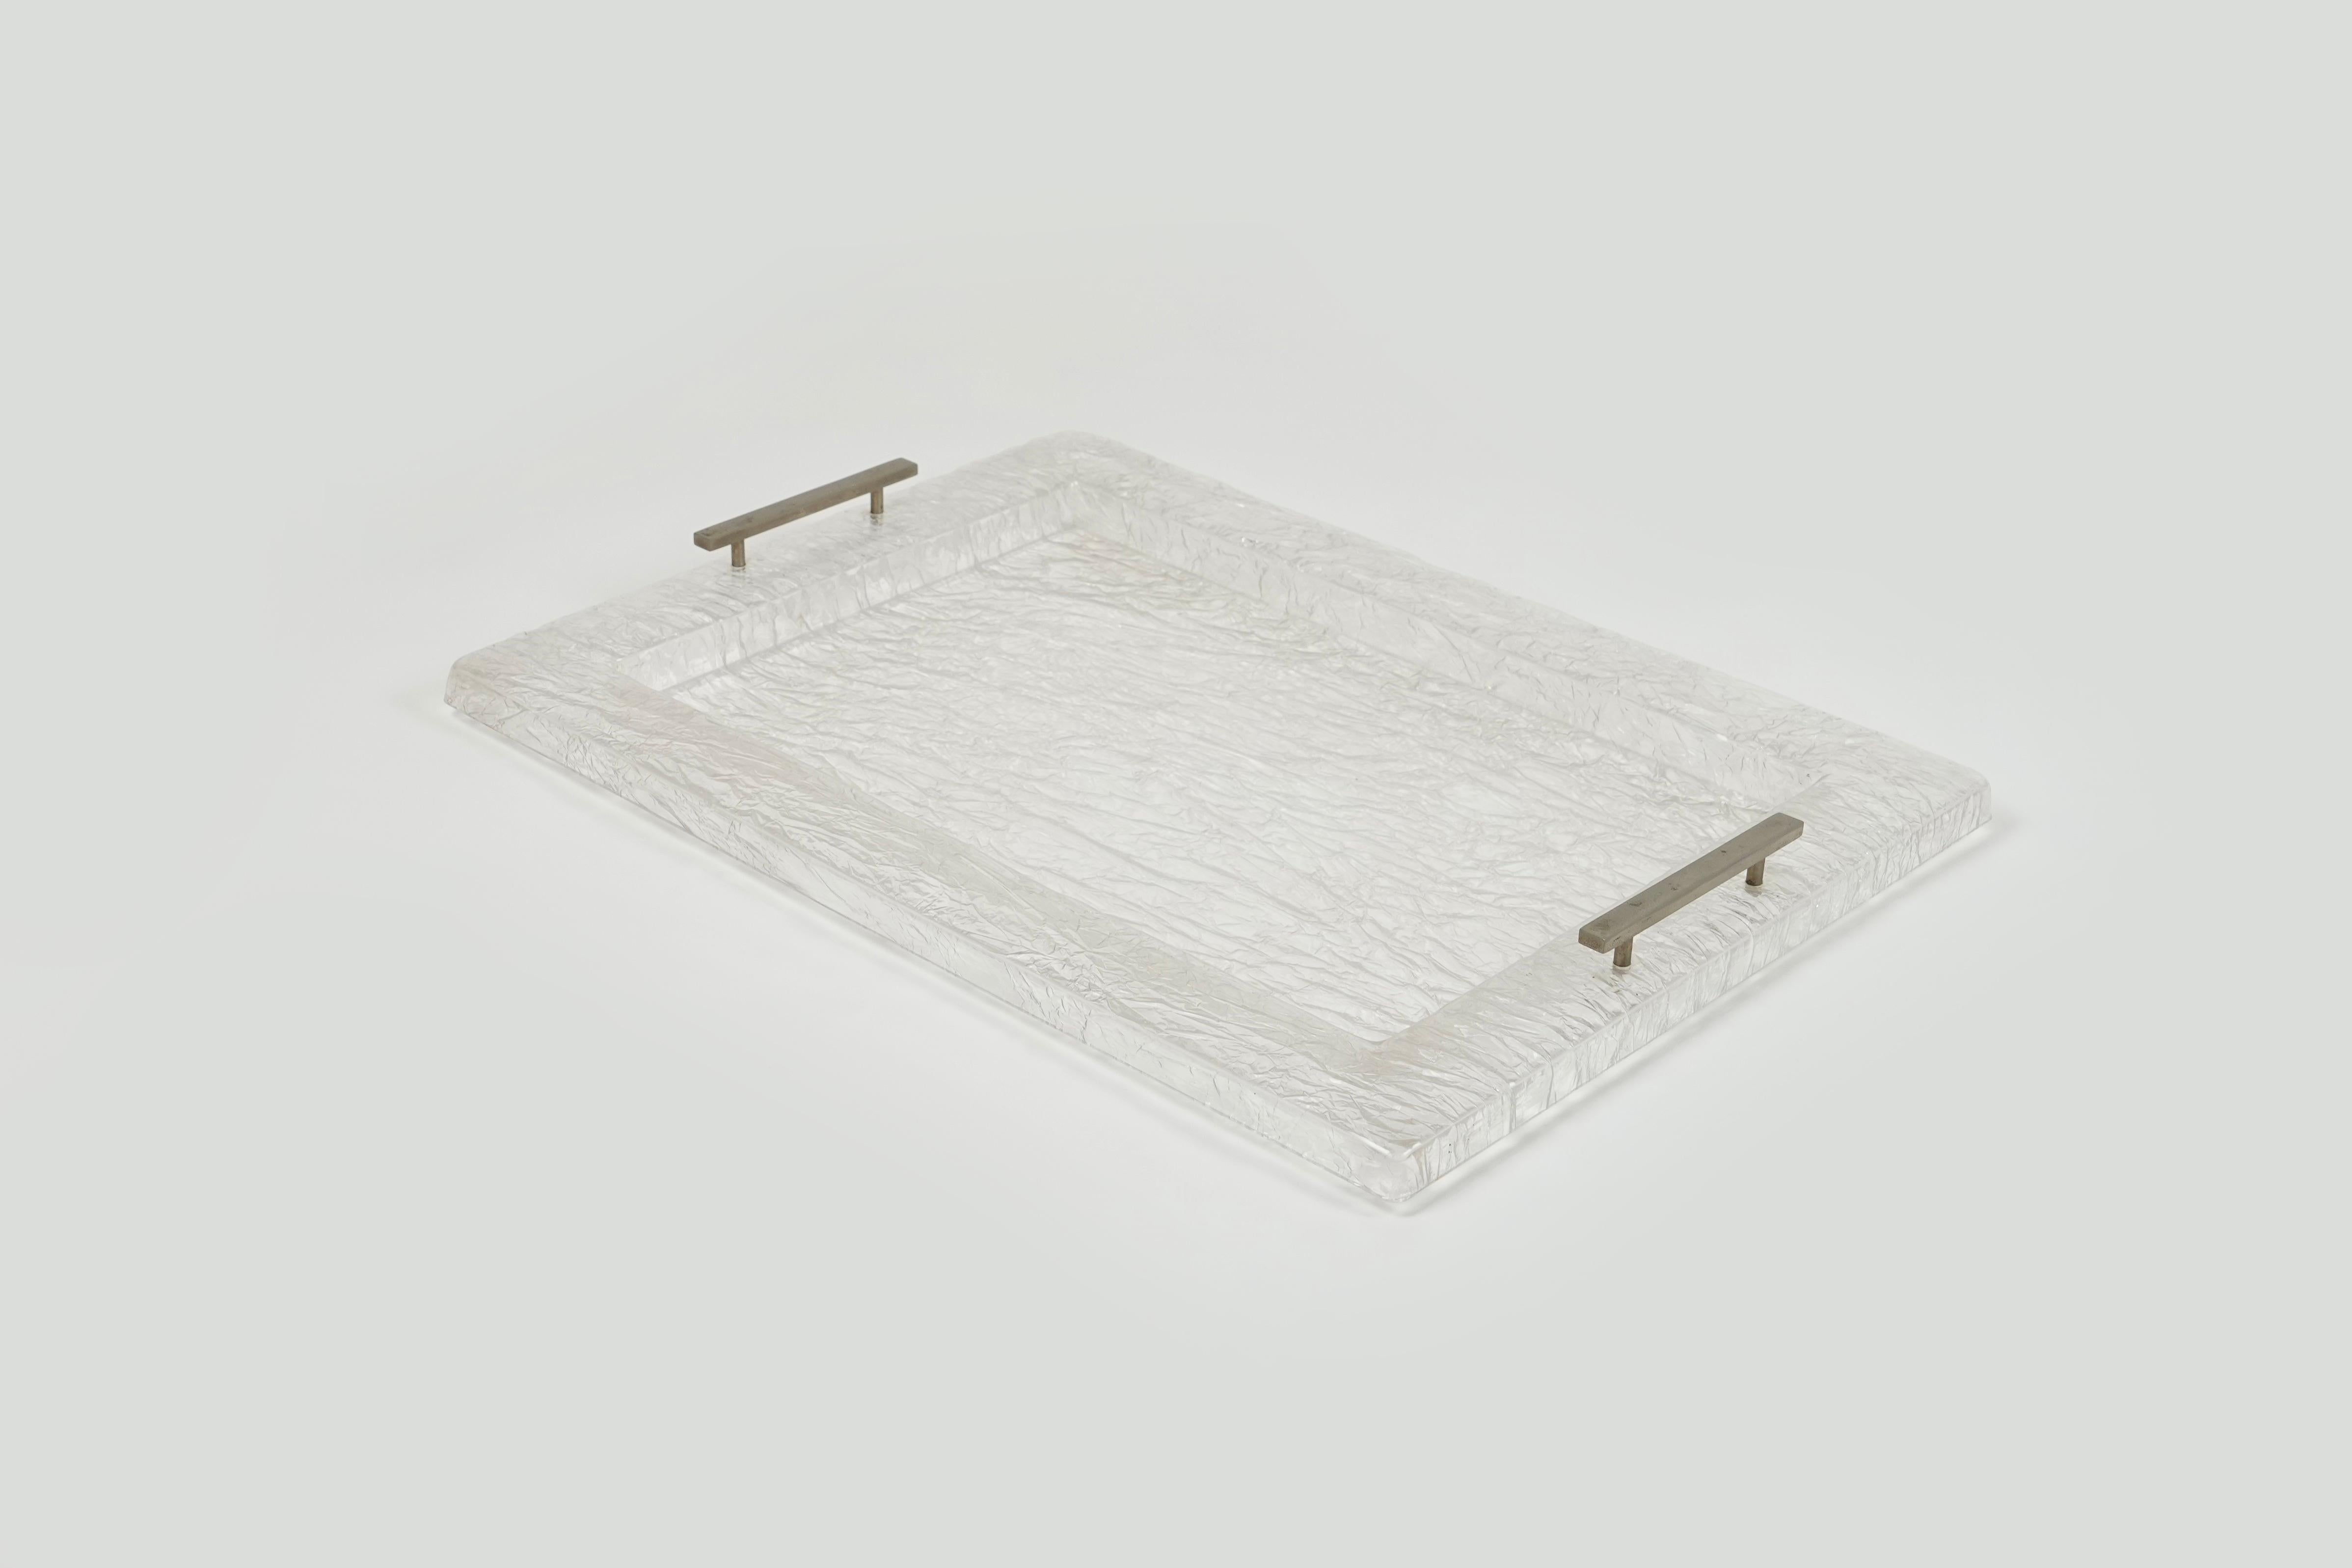 Amazing rectangular large serving tray in lucite ice effect whit metal handles in the style of Willy Rizzo.

Made in Italy in the 1980s.